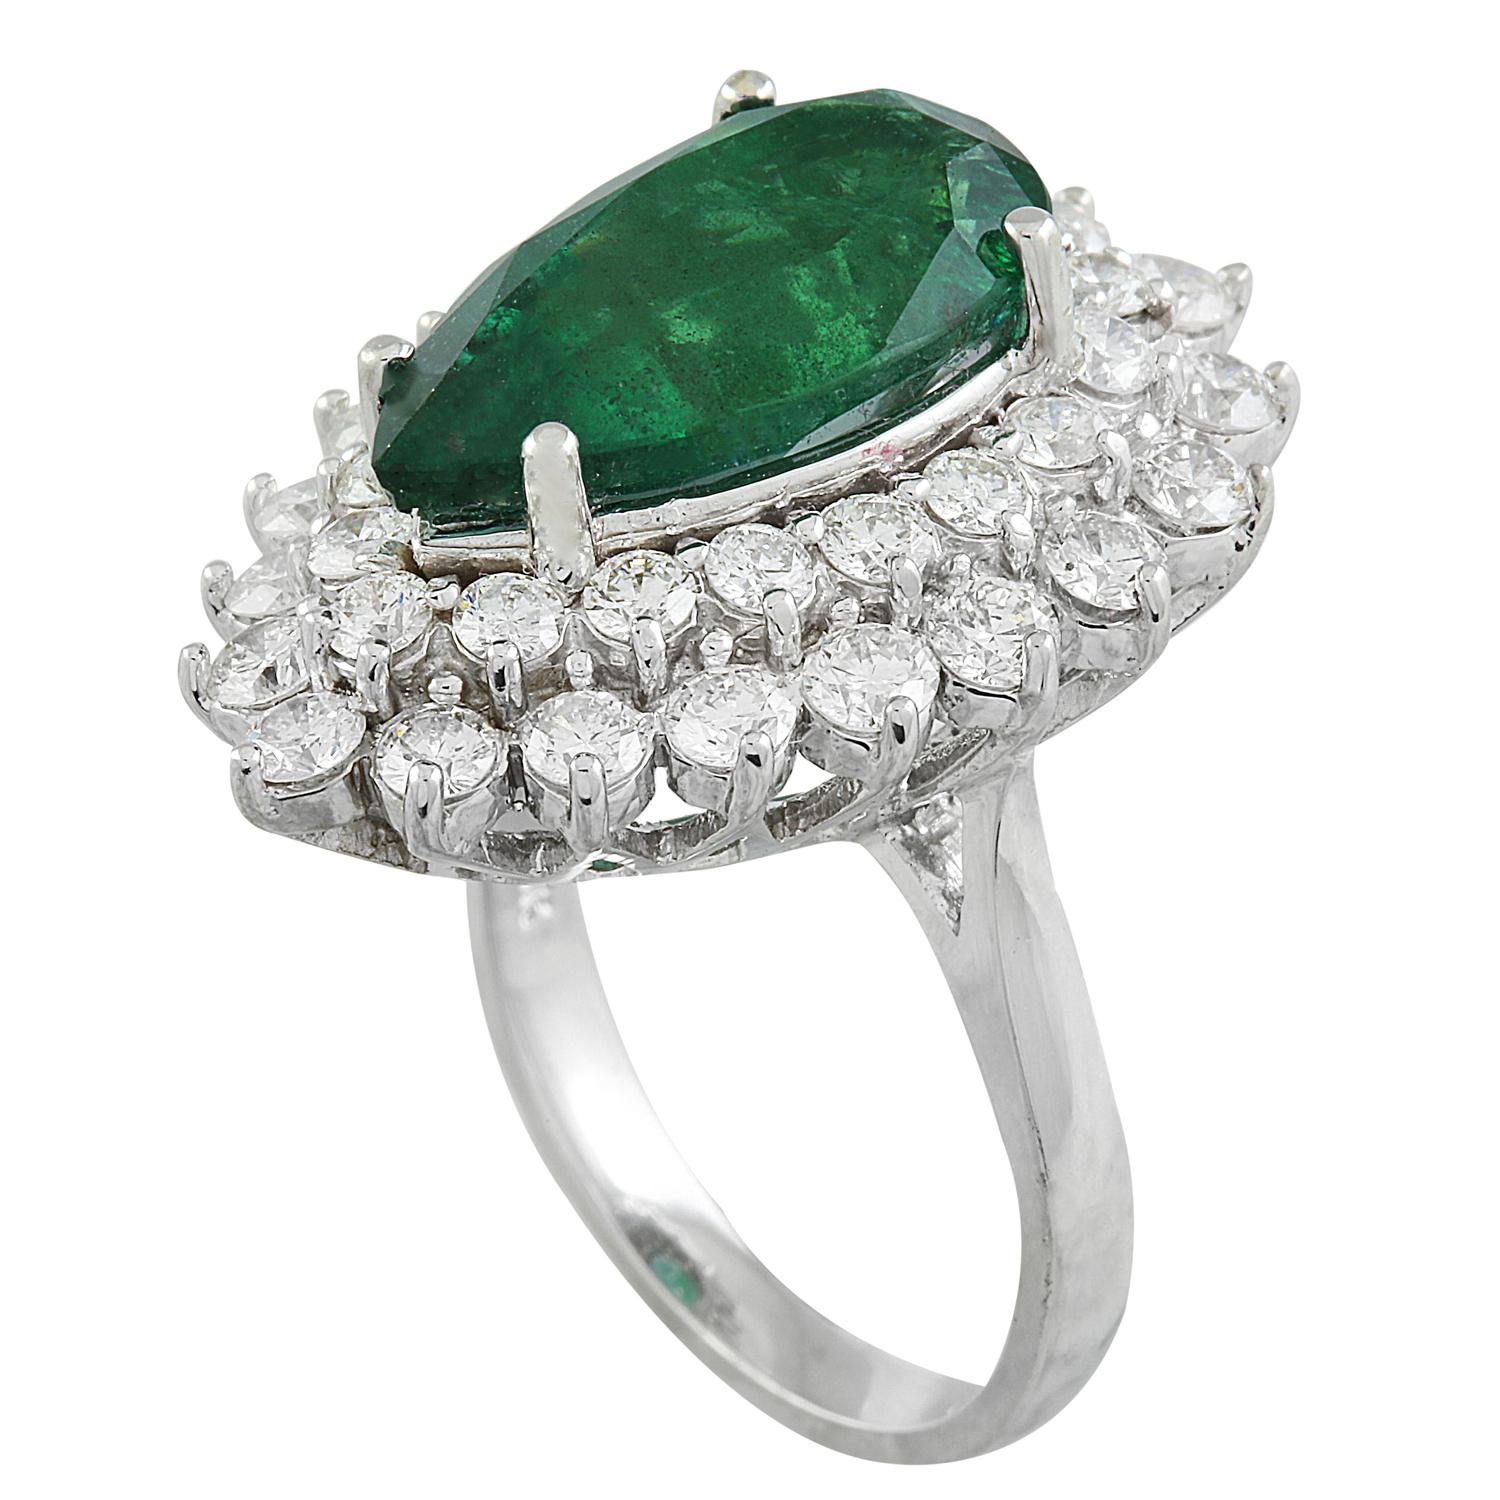 9.05 Carat Natural Emerald 14 Karat Solid White Gold Diamond Ring
Stamped: 14K 
Total Ring Weight: 10.7 Grams 
Emerald Weight 6.55 Carat (17.00x9.00 Millimeters)
Diamond Weight: 2.50 Carat (F-G Color, VS2-SI1 Clarity ) 
Face Measures: 26.85x19.55